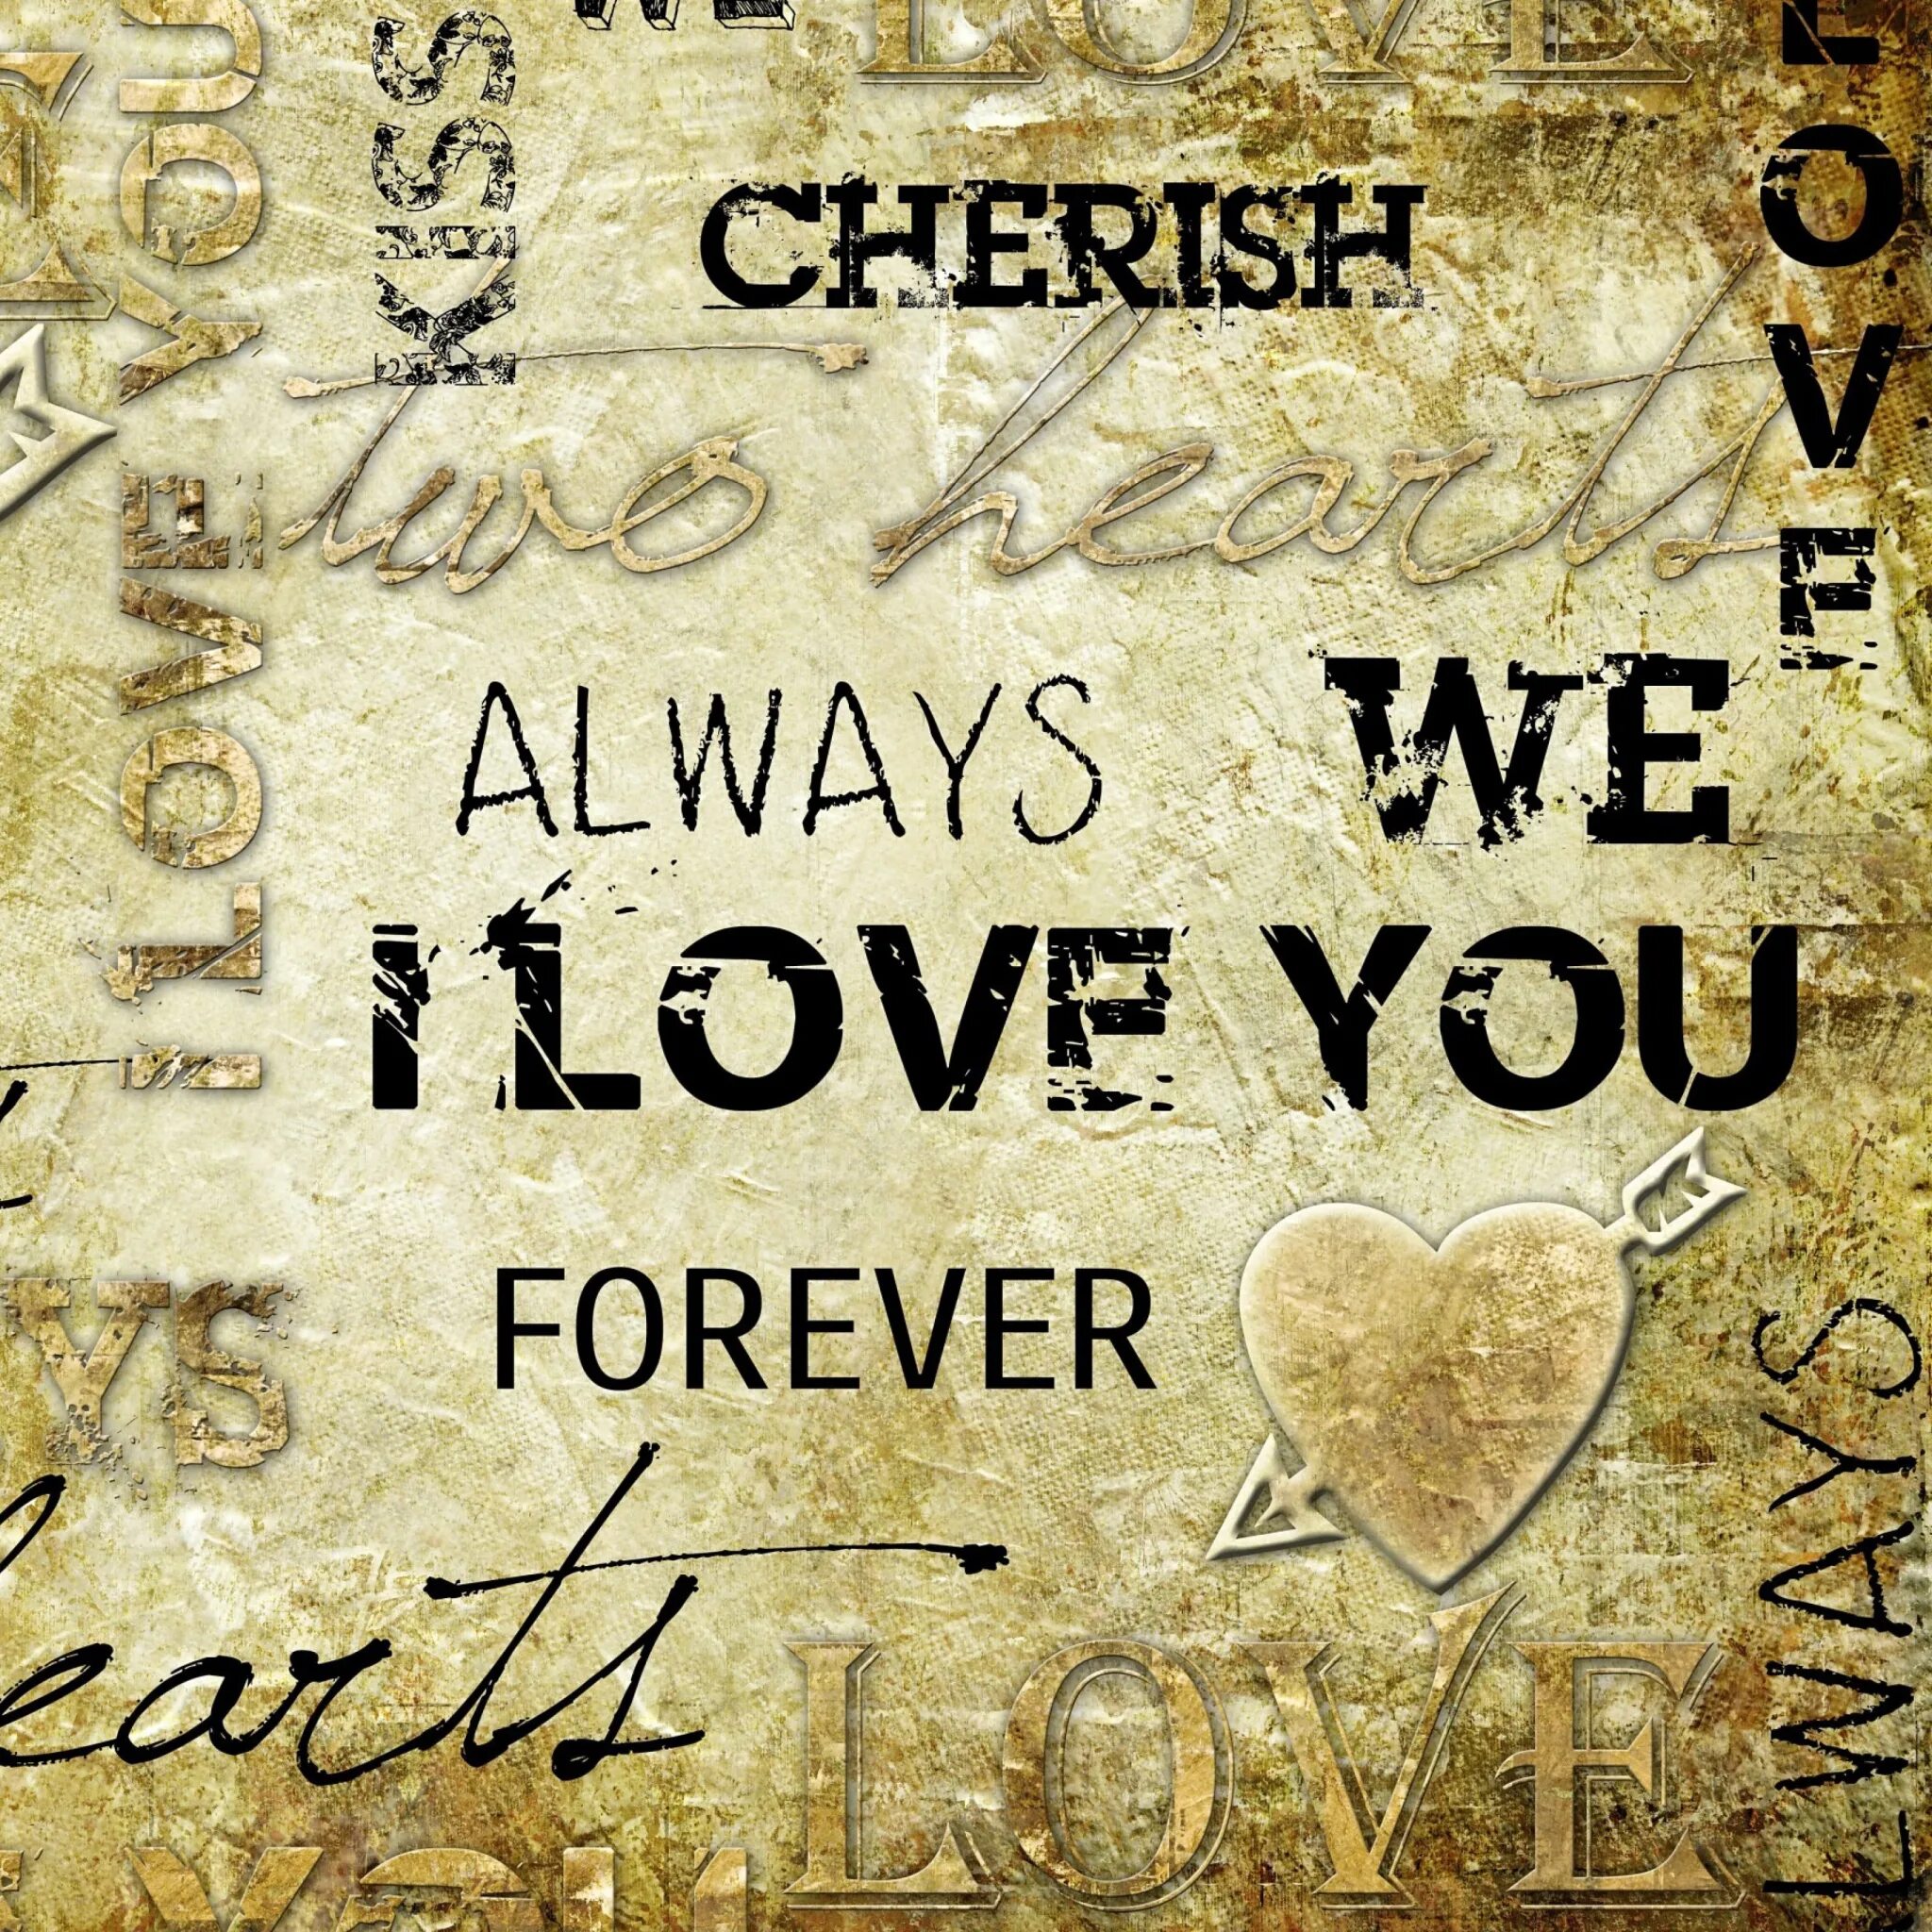 I Love you Forever картинки. Forever Loved. Обои на рабочий стол Love Forever. Love me Forever.